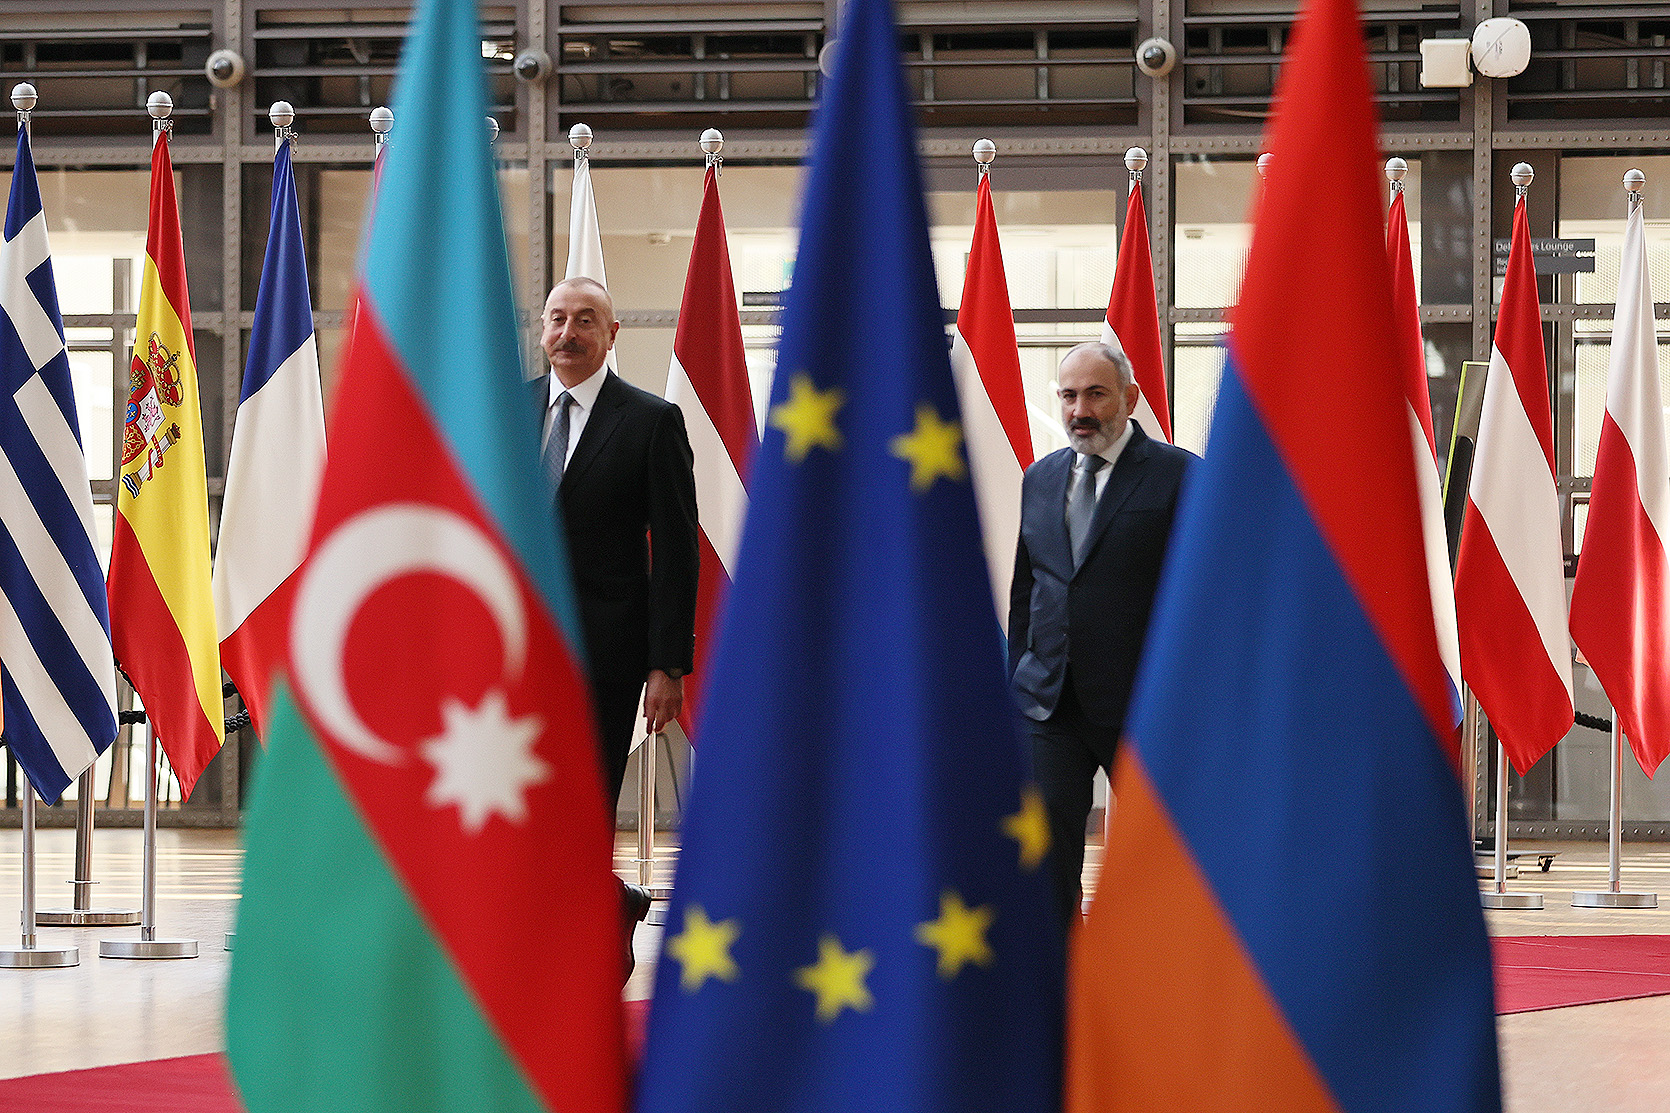 Armenia, Azerbaijan agree to more meetings after ‘productive’ Brussels talks